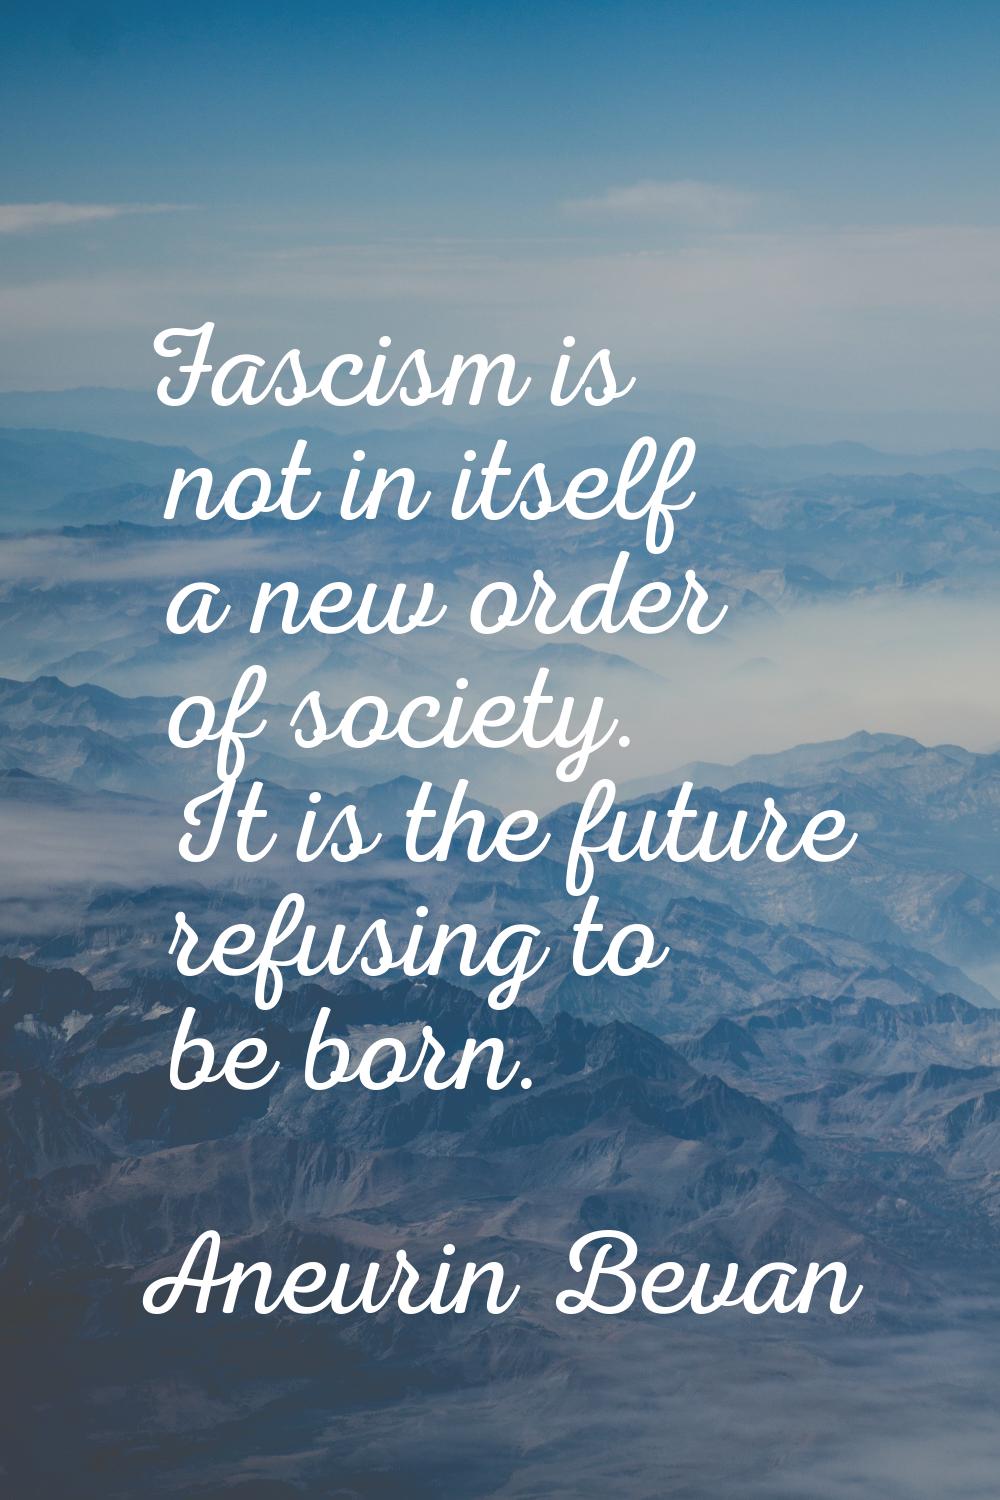 Fascism is not in itself a new order of society. It is the future refusing to be born.